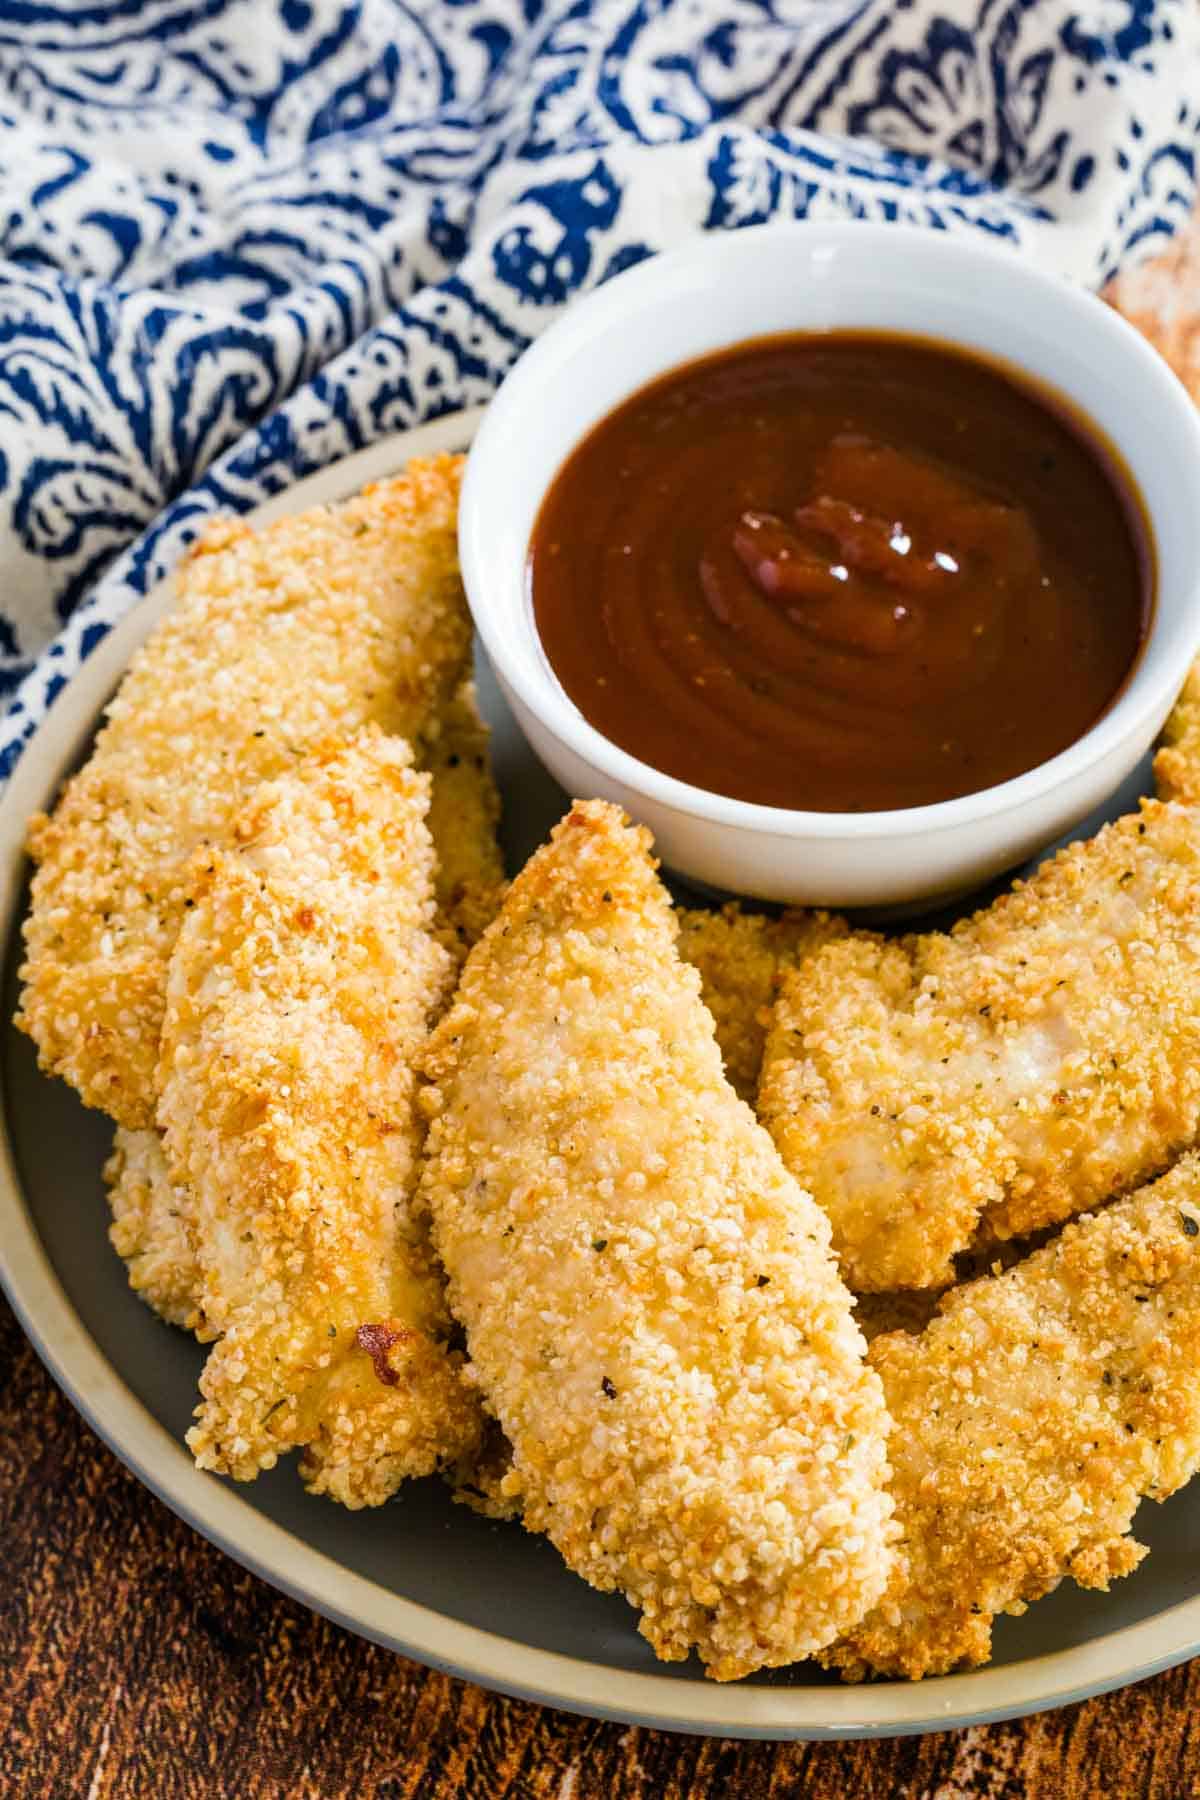 Top view of gluten-free baked chicken tenders on a plate, surrounding a dish of ketchup for dipping.